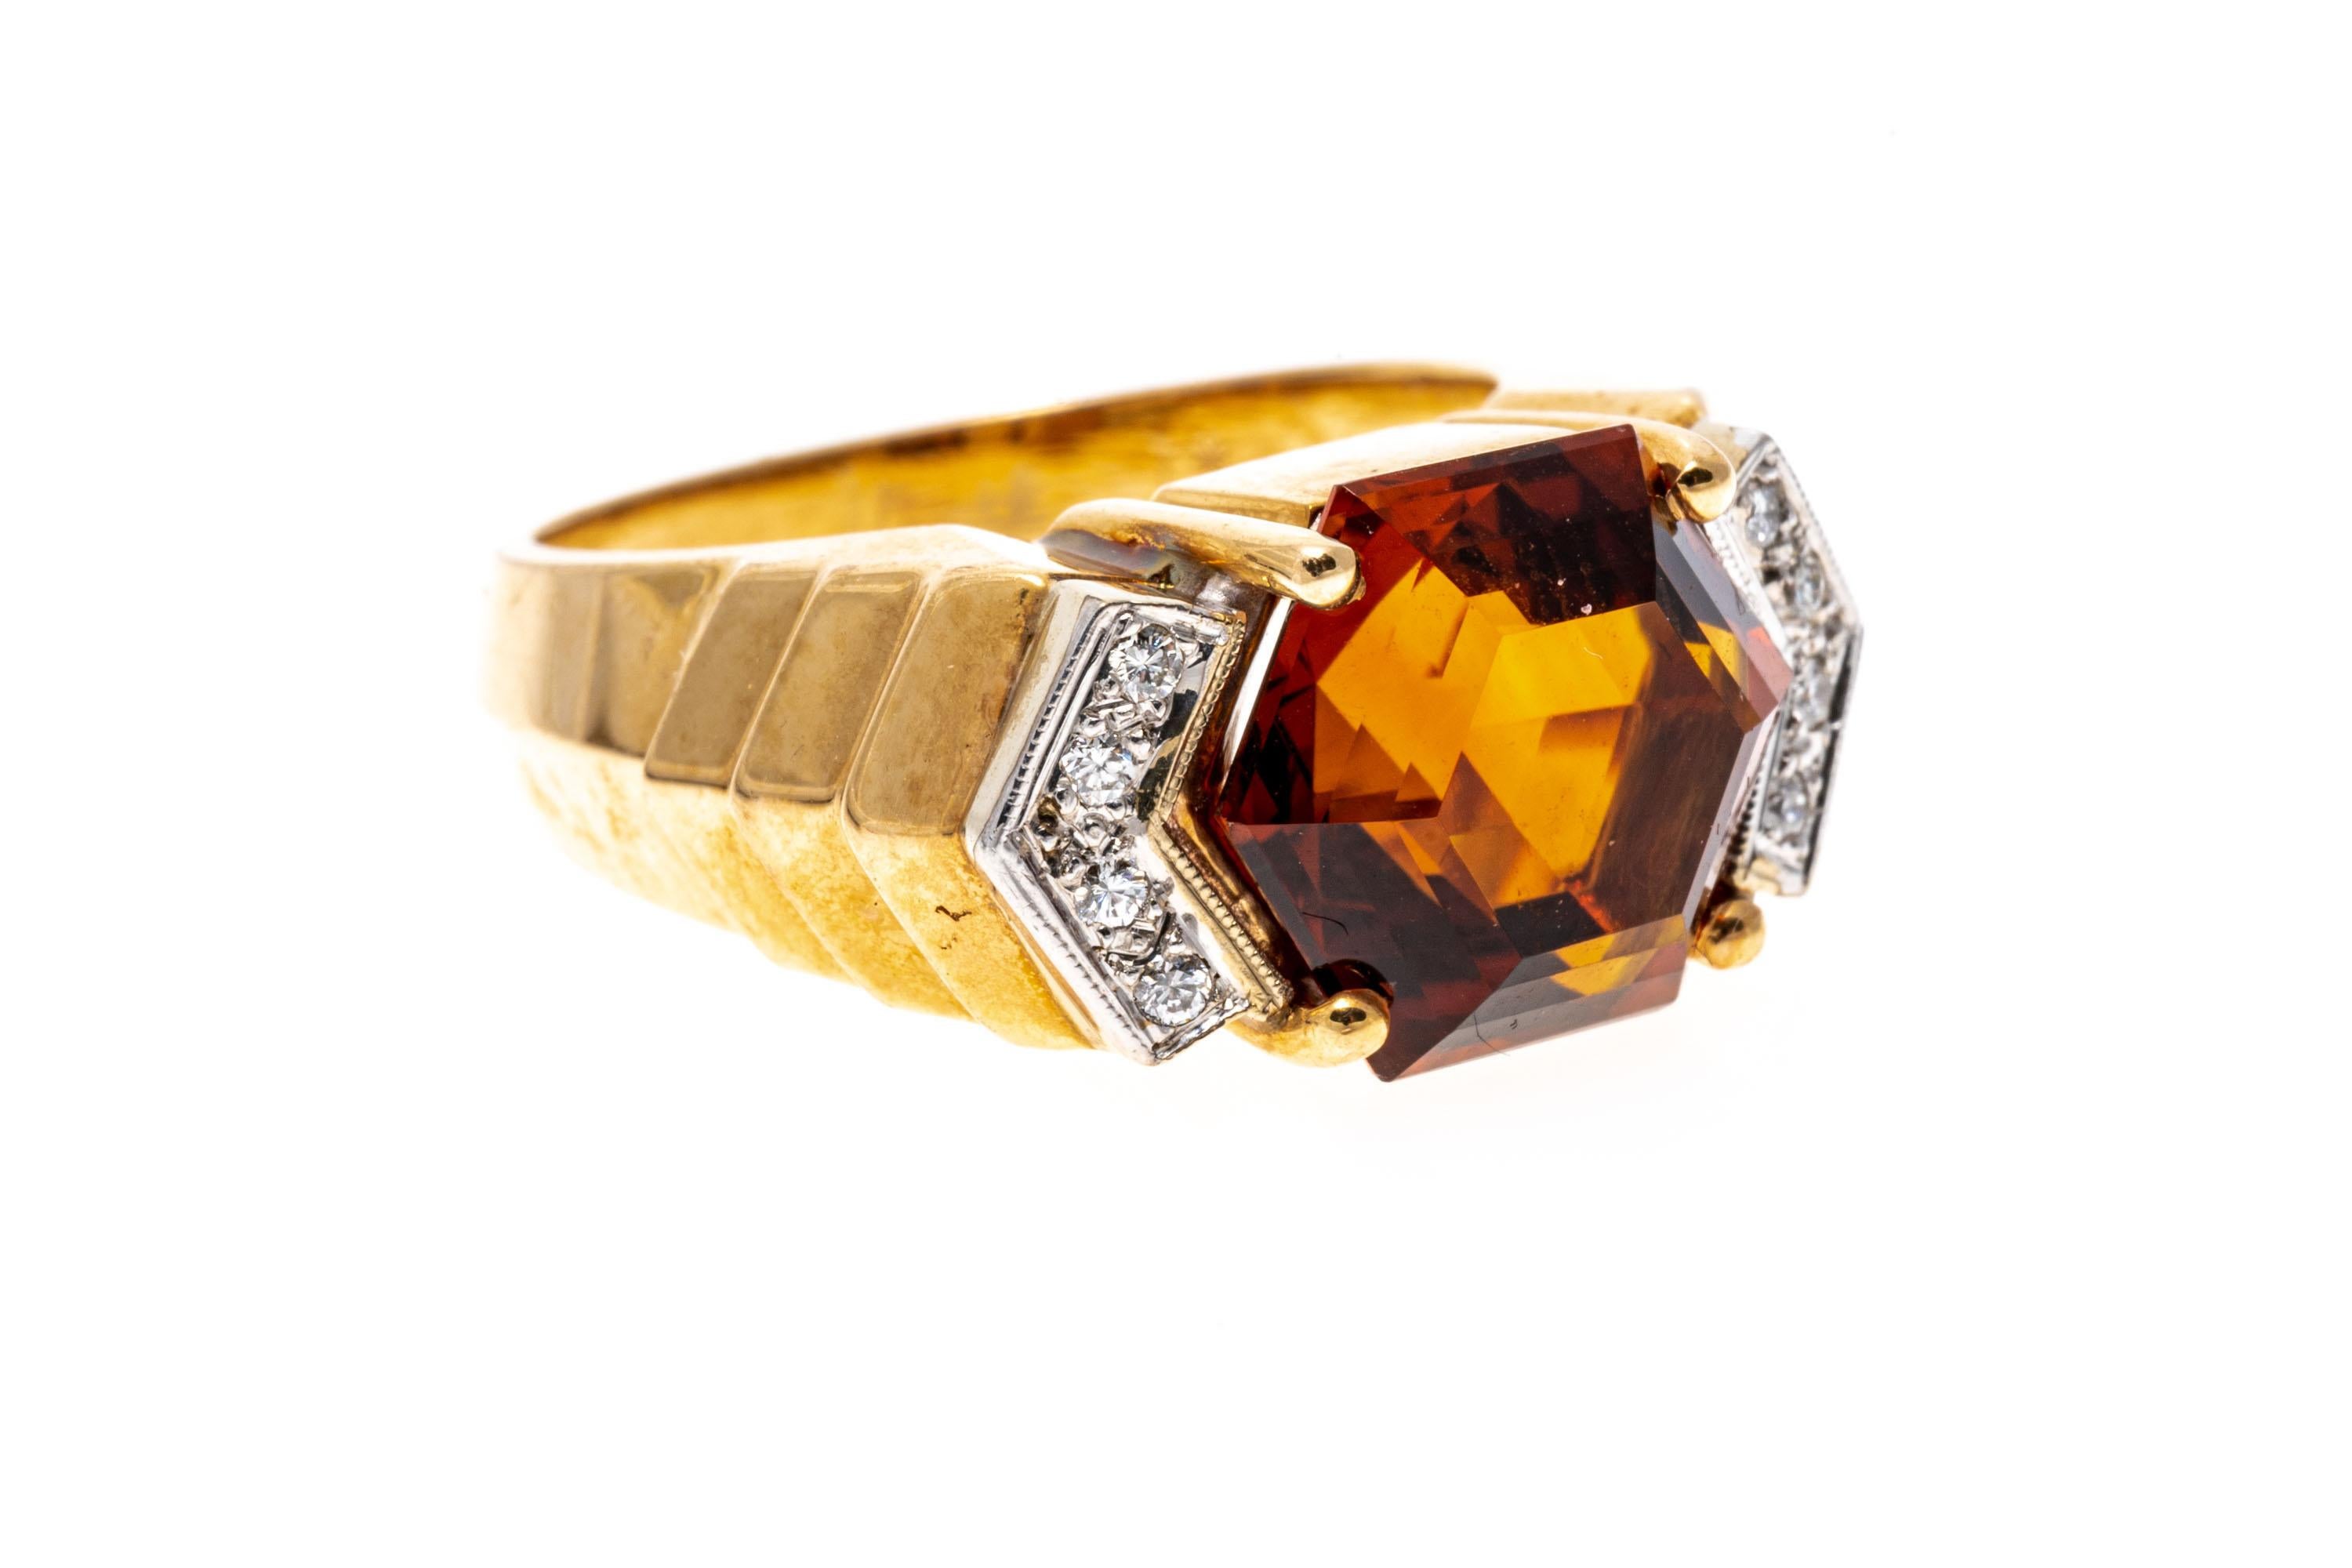 14k yellow gold ring. This chic ring features a center elongated hexagonal faceted, medium to dark orange color citrine, horizontally situated, and flanked by round faceted accent diamonds, approximately 0.08 TCW, prong set. The ring is adorned by a